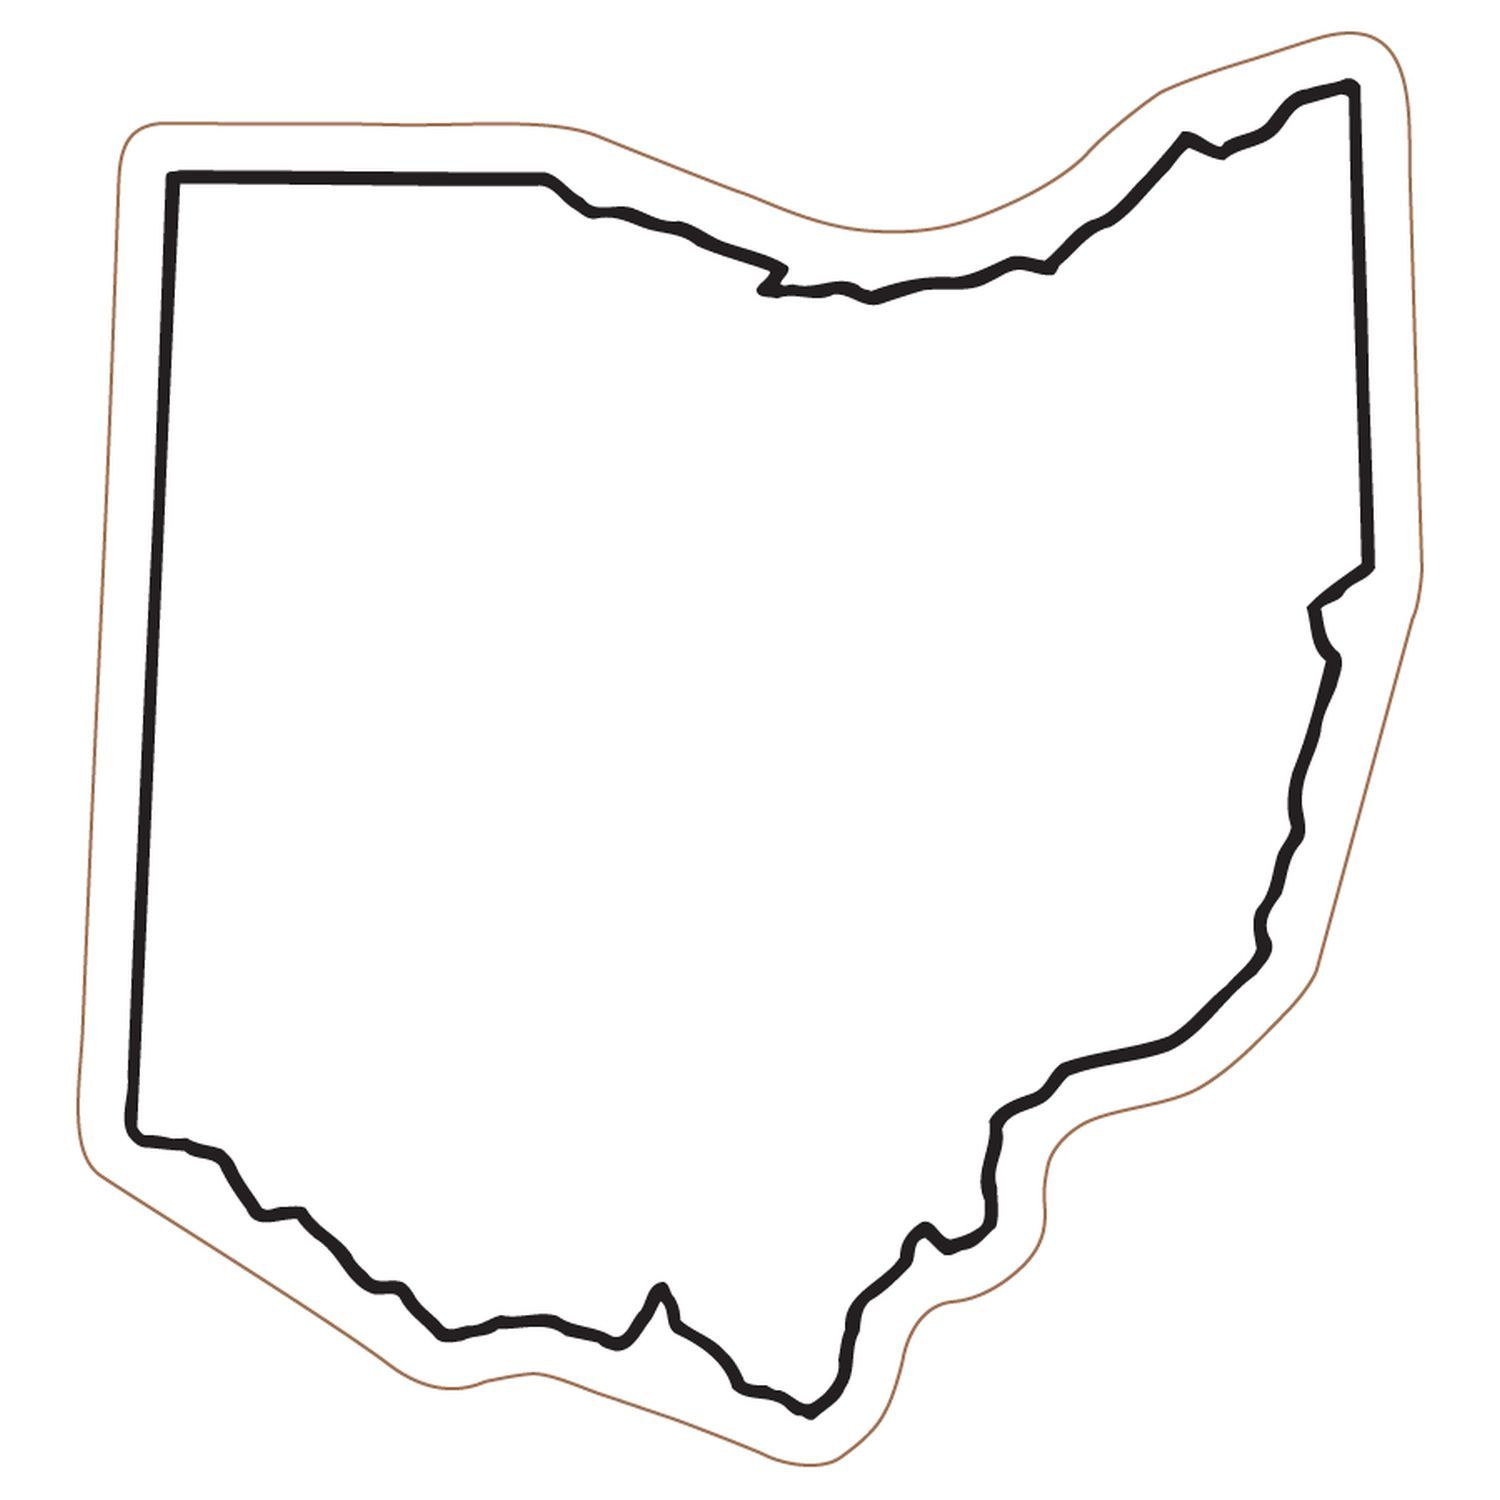 Best Photos of Printable State Templates Ohio - Ohio State Outline ...